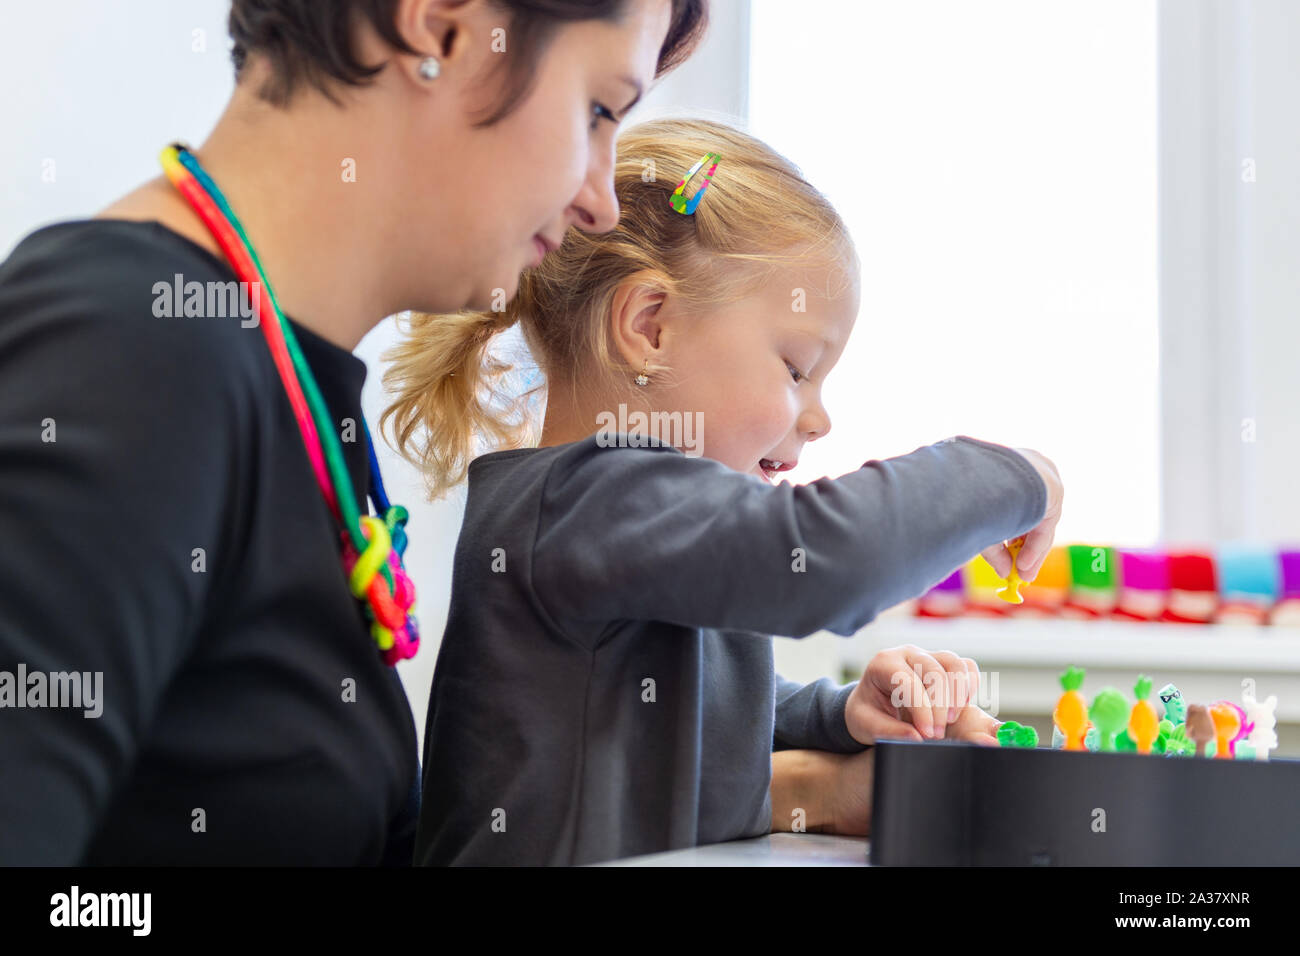 Toddler girl in child occupational therapy session doing sensory playful exercises with her therapist. Stock Photo